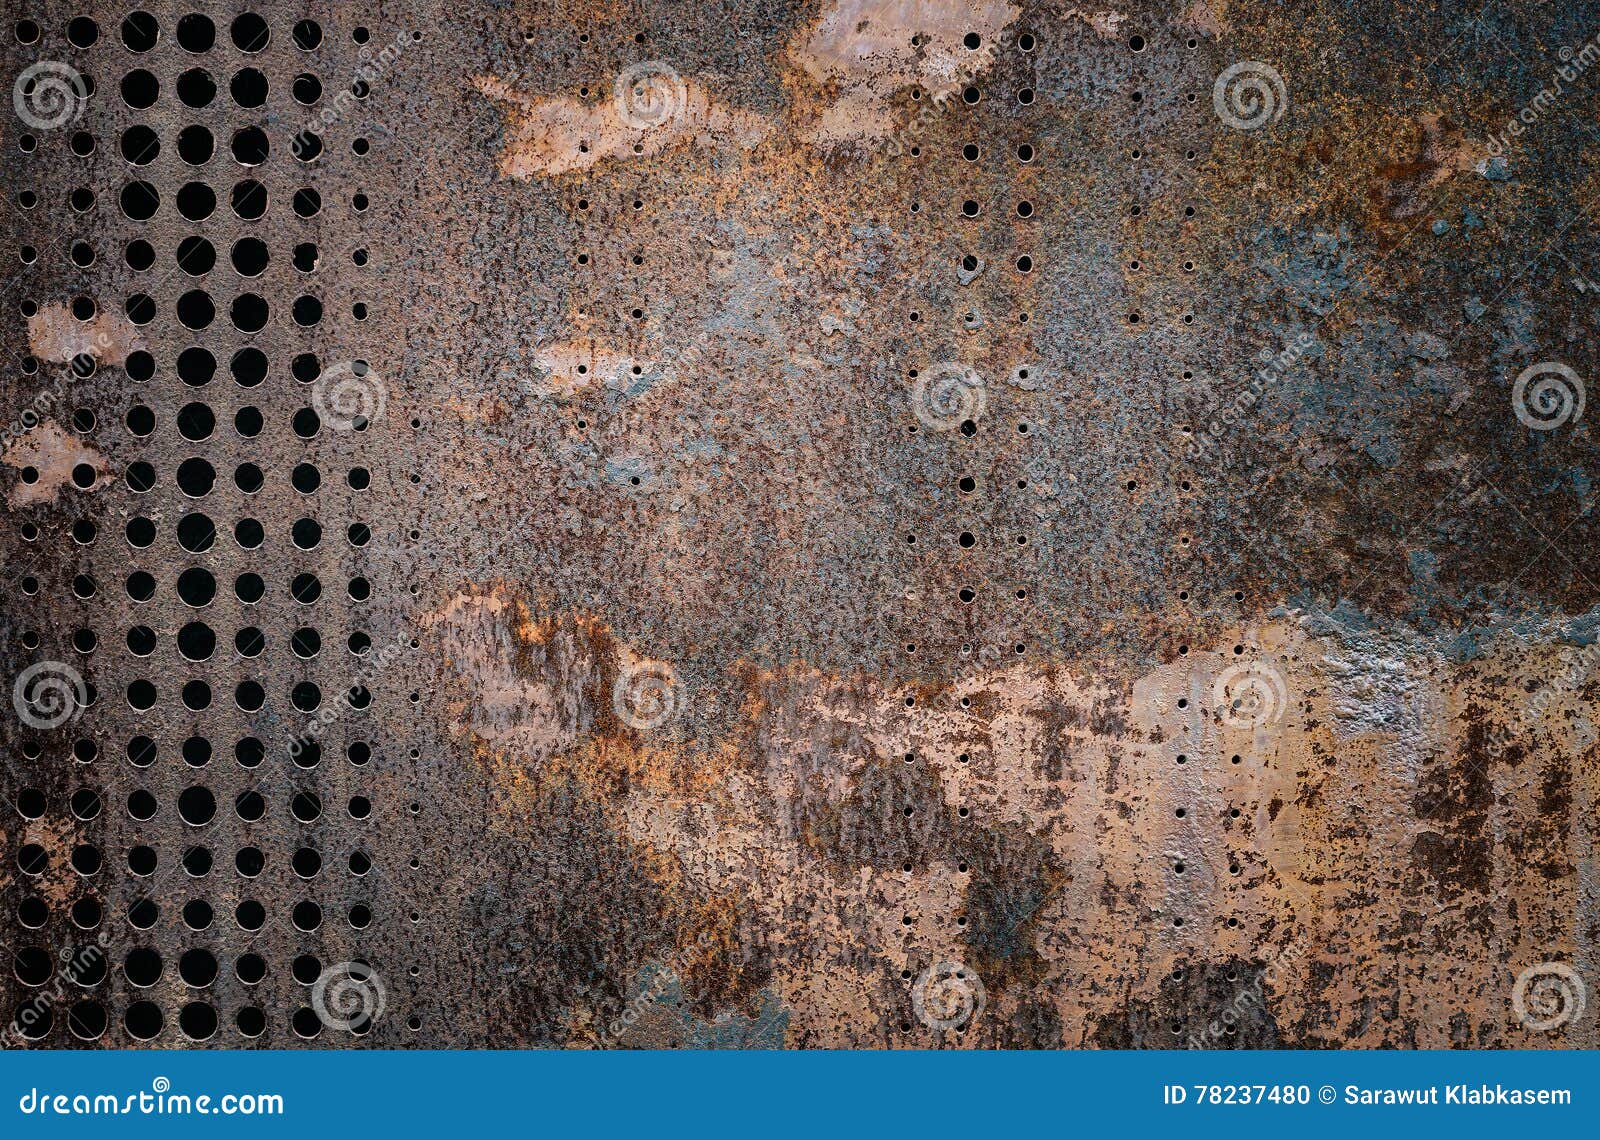 the vintag rusty grunge steel decorated by drilling a wall textured background.